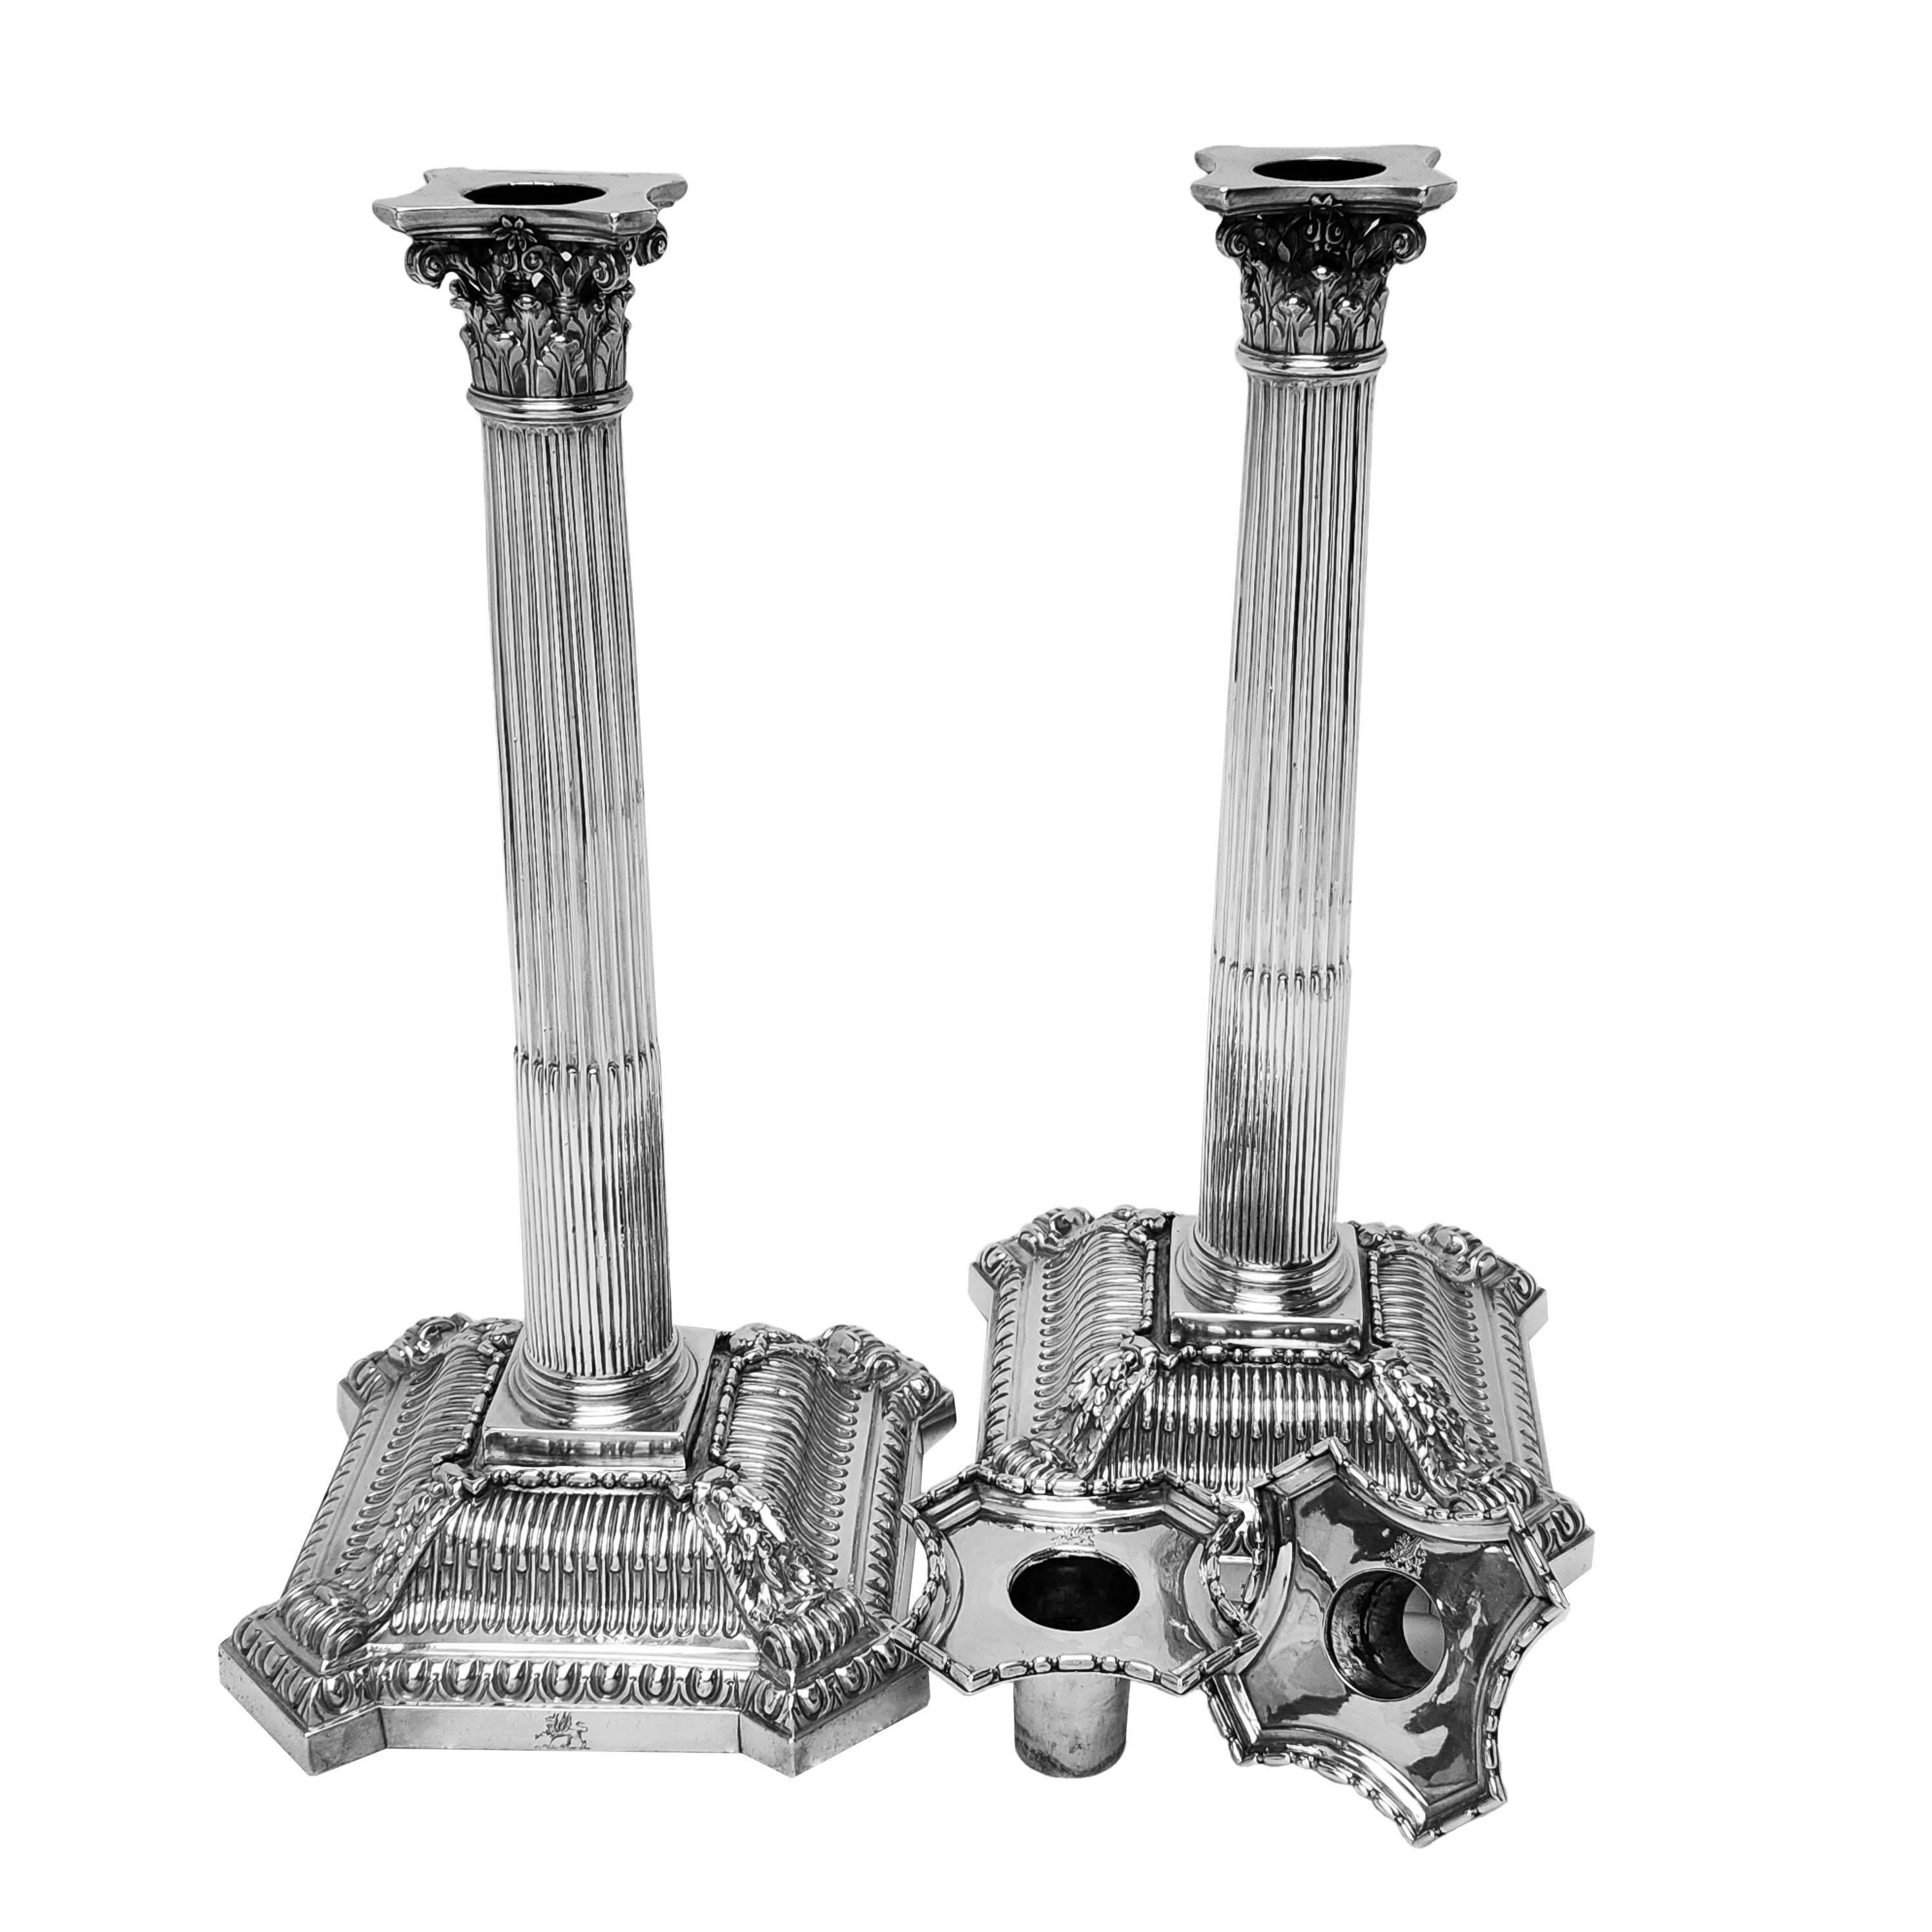 A magnificent Pair Antique Georgian Silver Candlesticks. This impressive pair of George II Candlesticks has a classic Corinthian style sconce on top of a fluted column. The Candlesticks have shaped square bases covered with detailed chased designs.